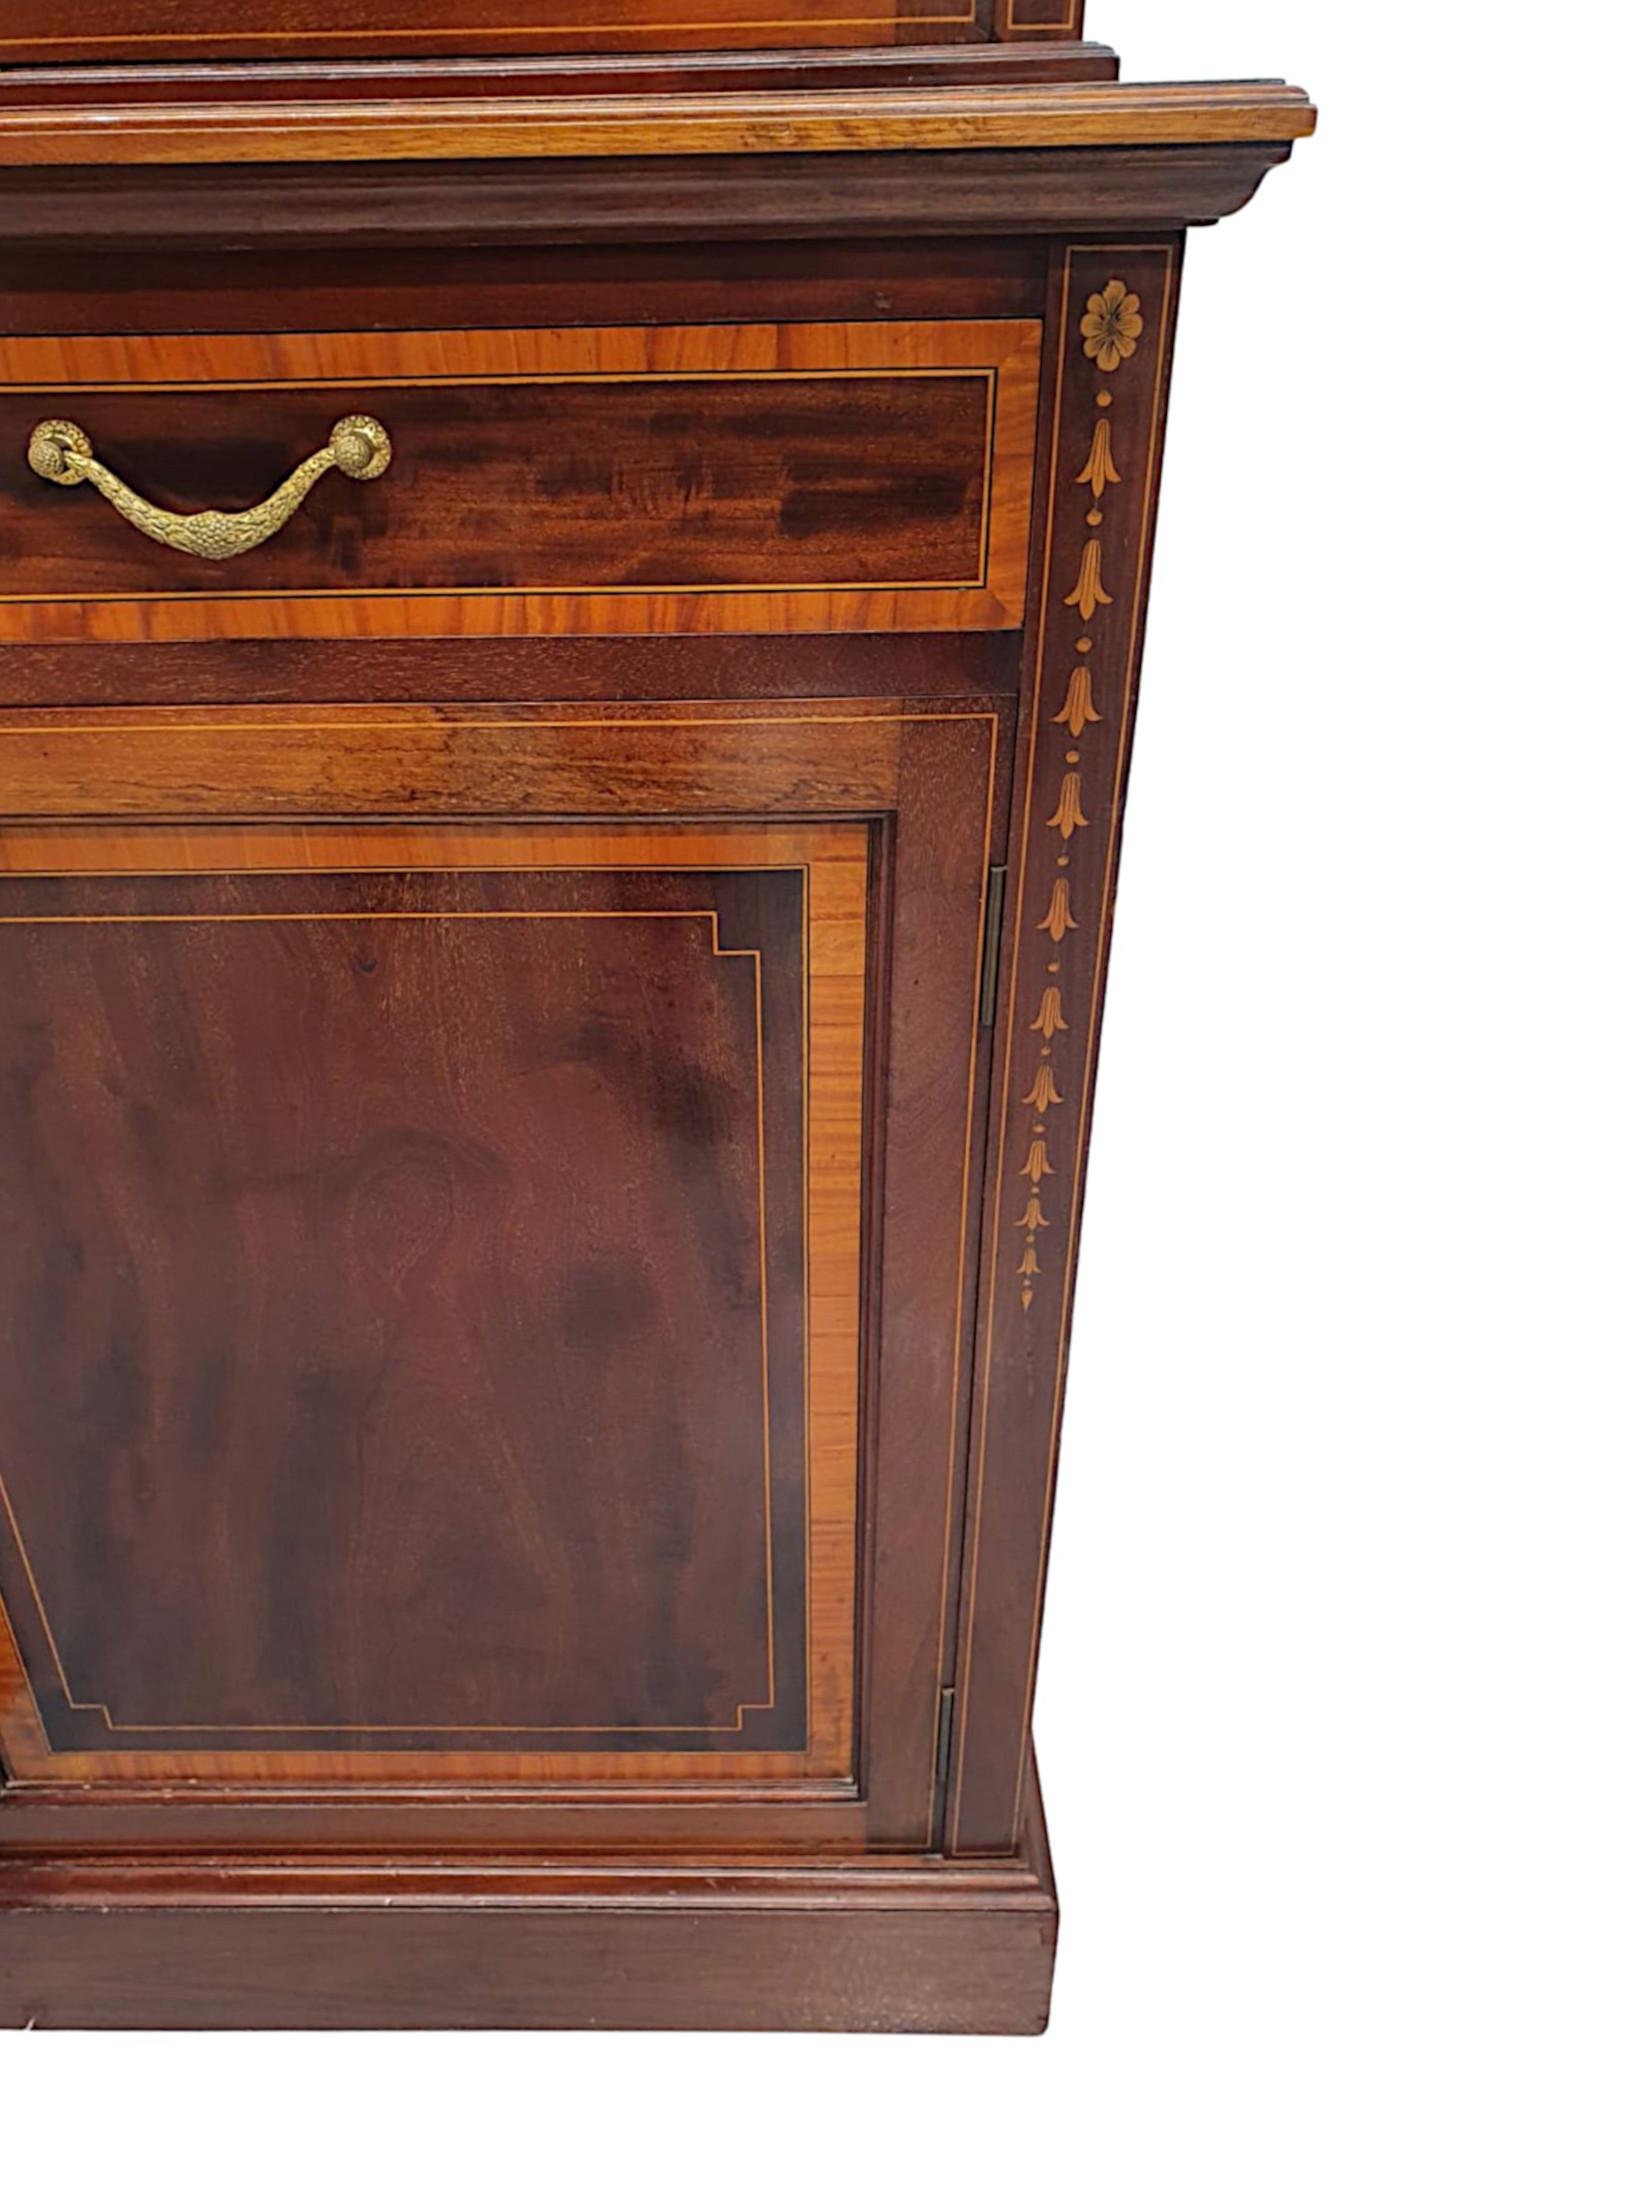 Stunning Edwardian Inlaid Bookcase by S and H Jewell London For Sale 1